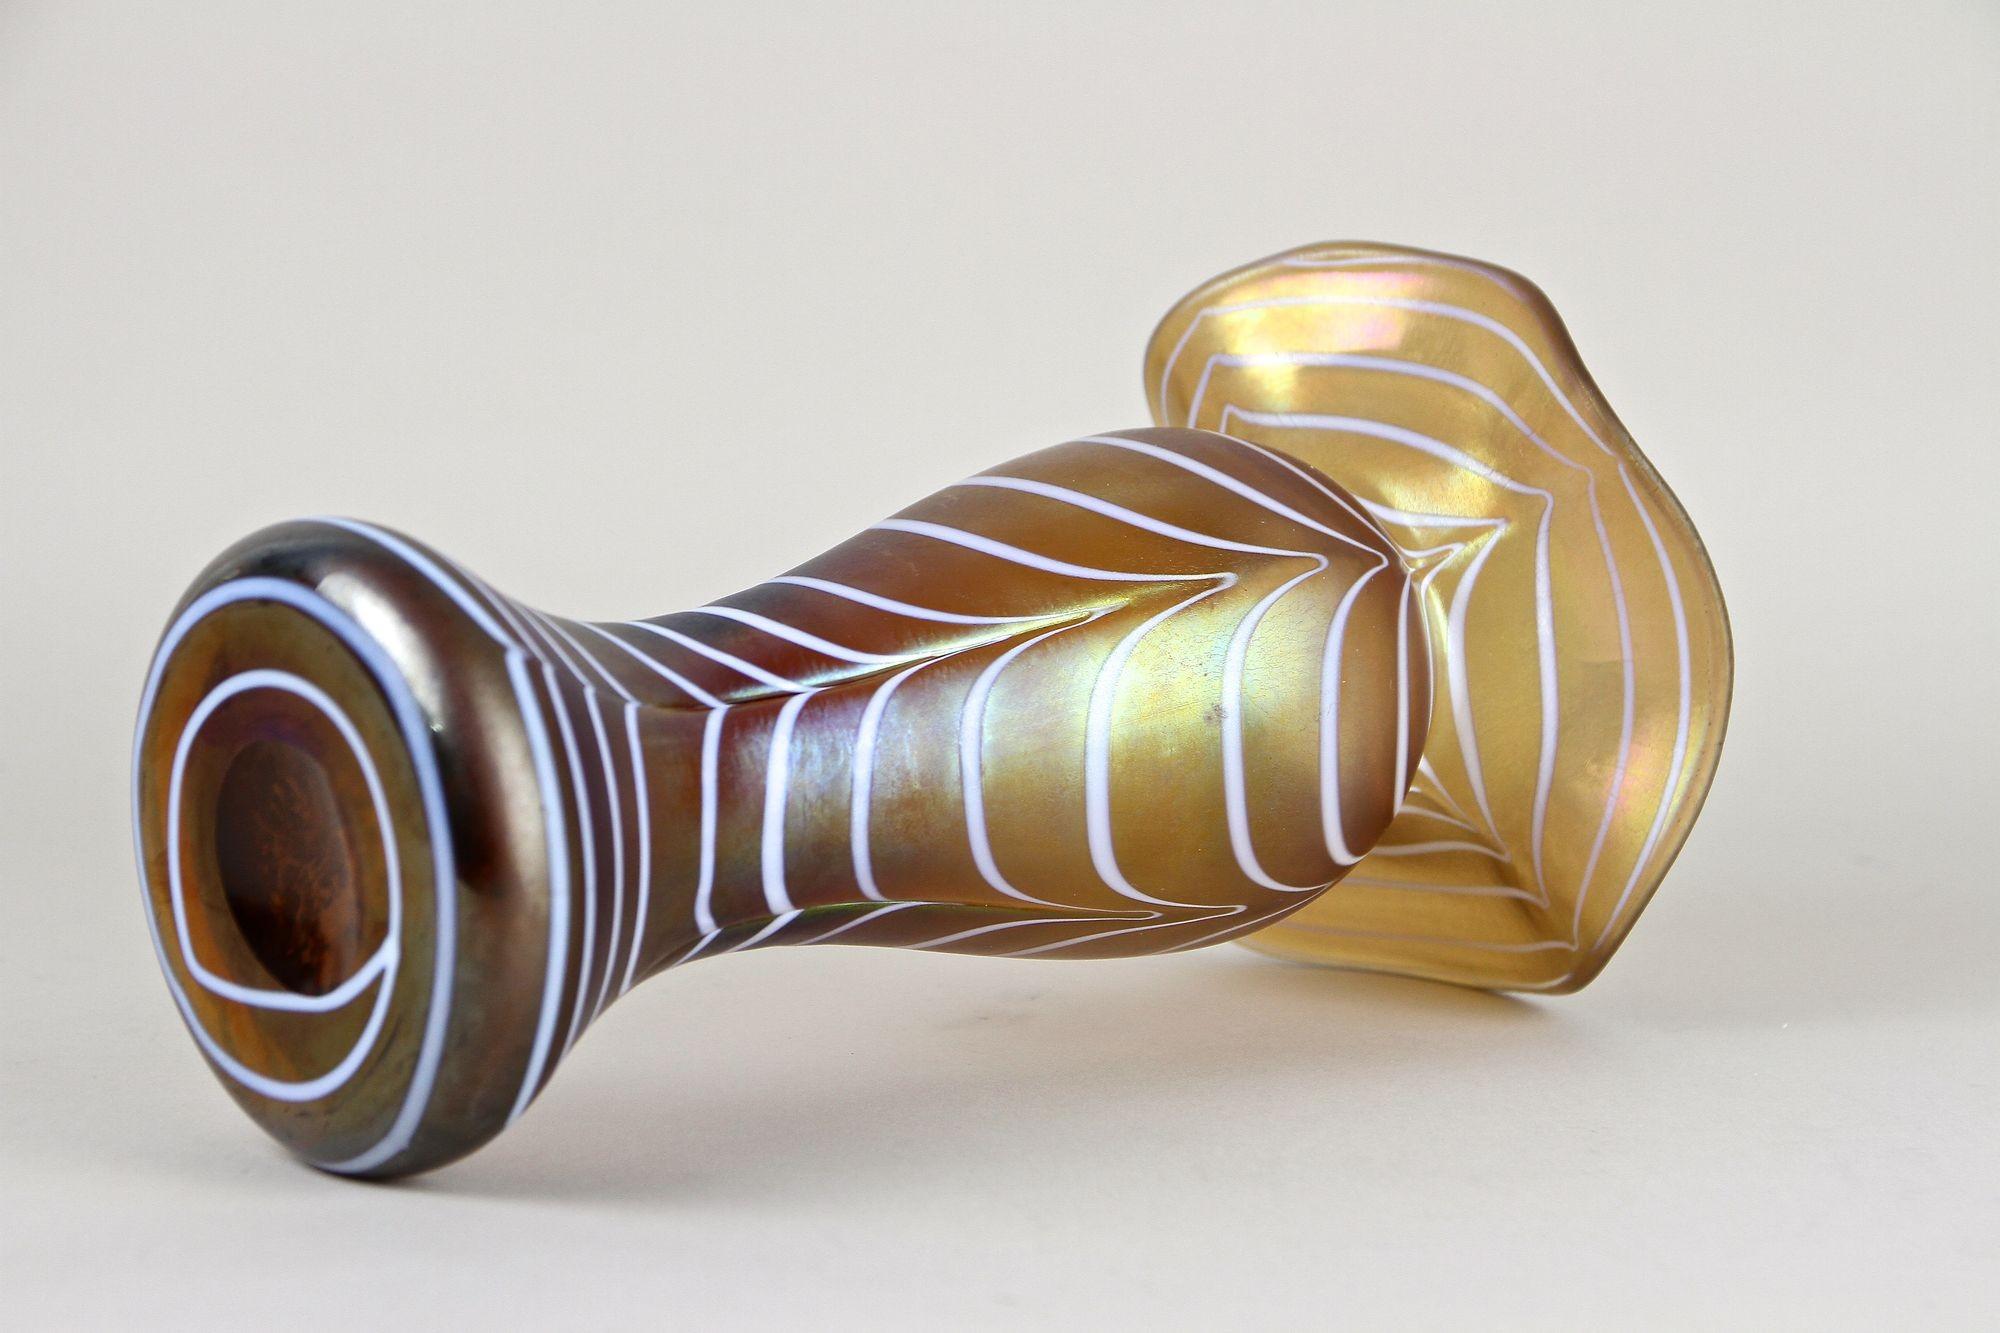 Art Nouveau Iridescent Glass Vase Attributed To Loetz Witwe, Bohemia, ca. 1915 For Sale 6